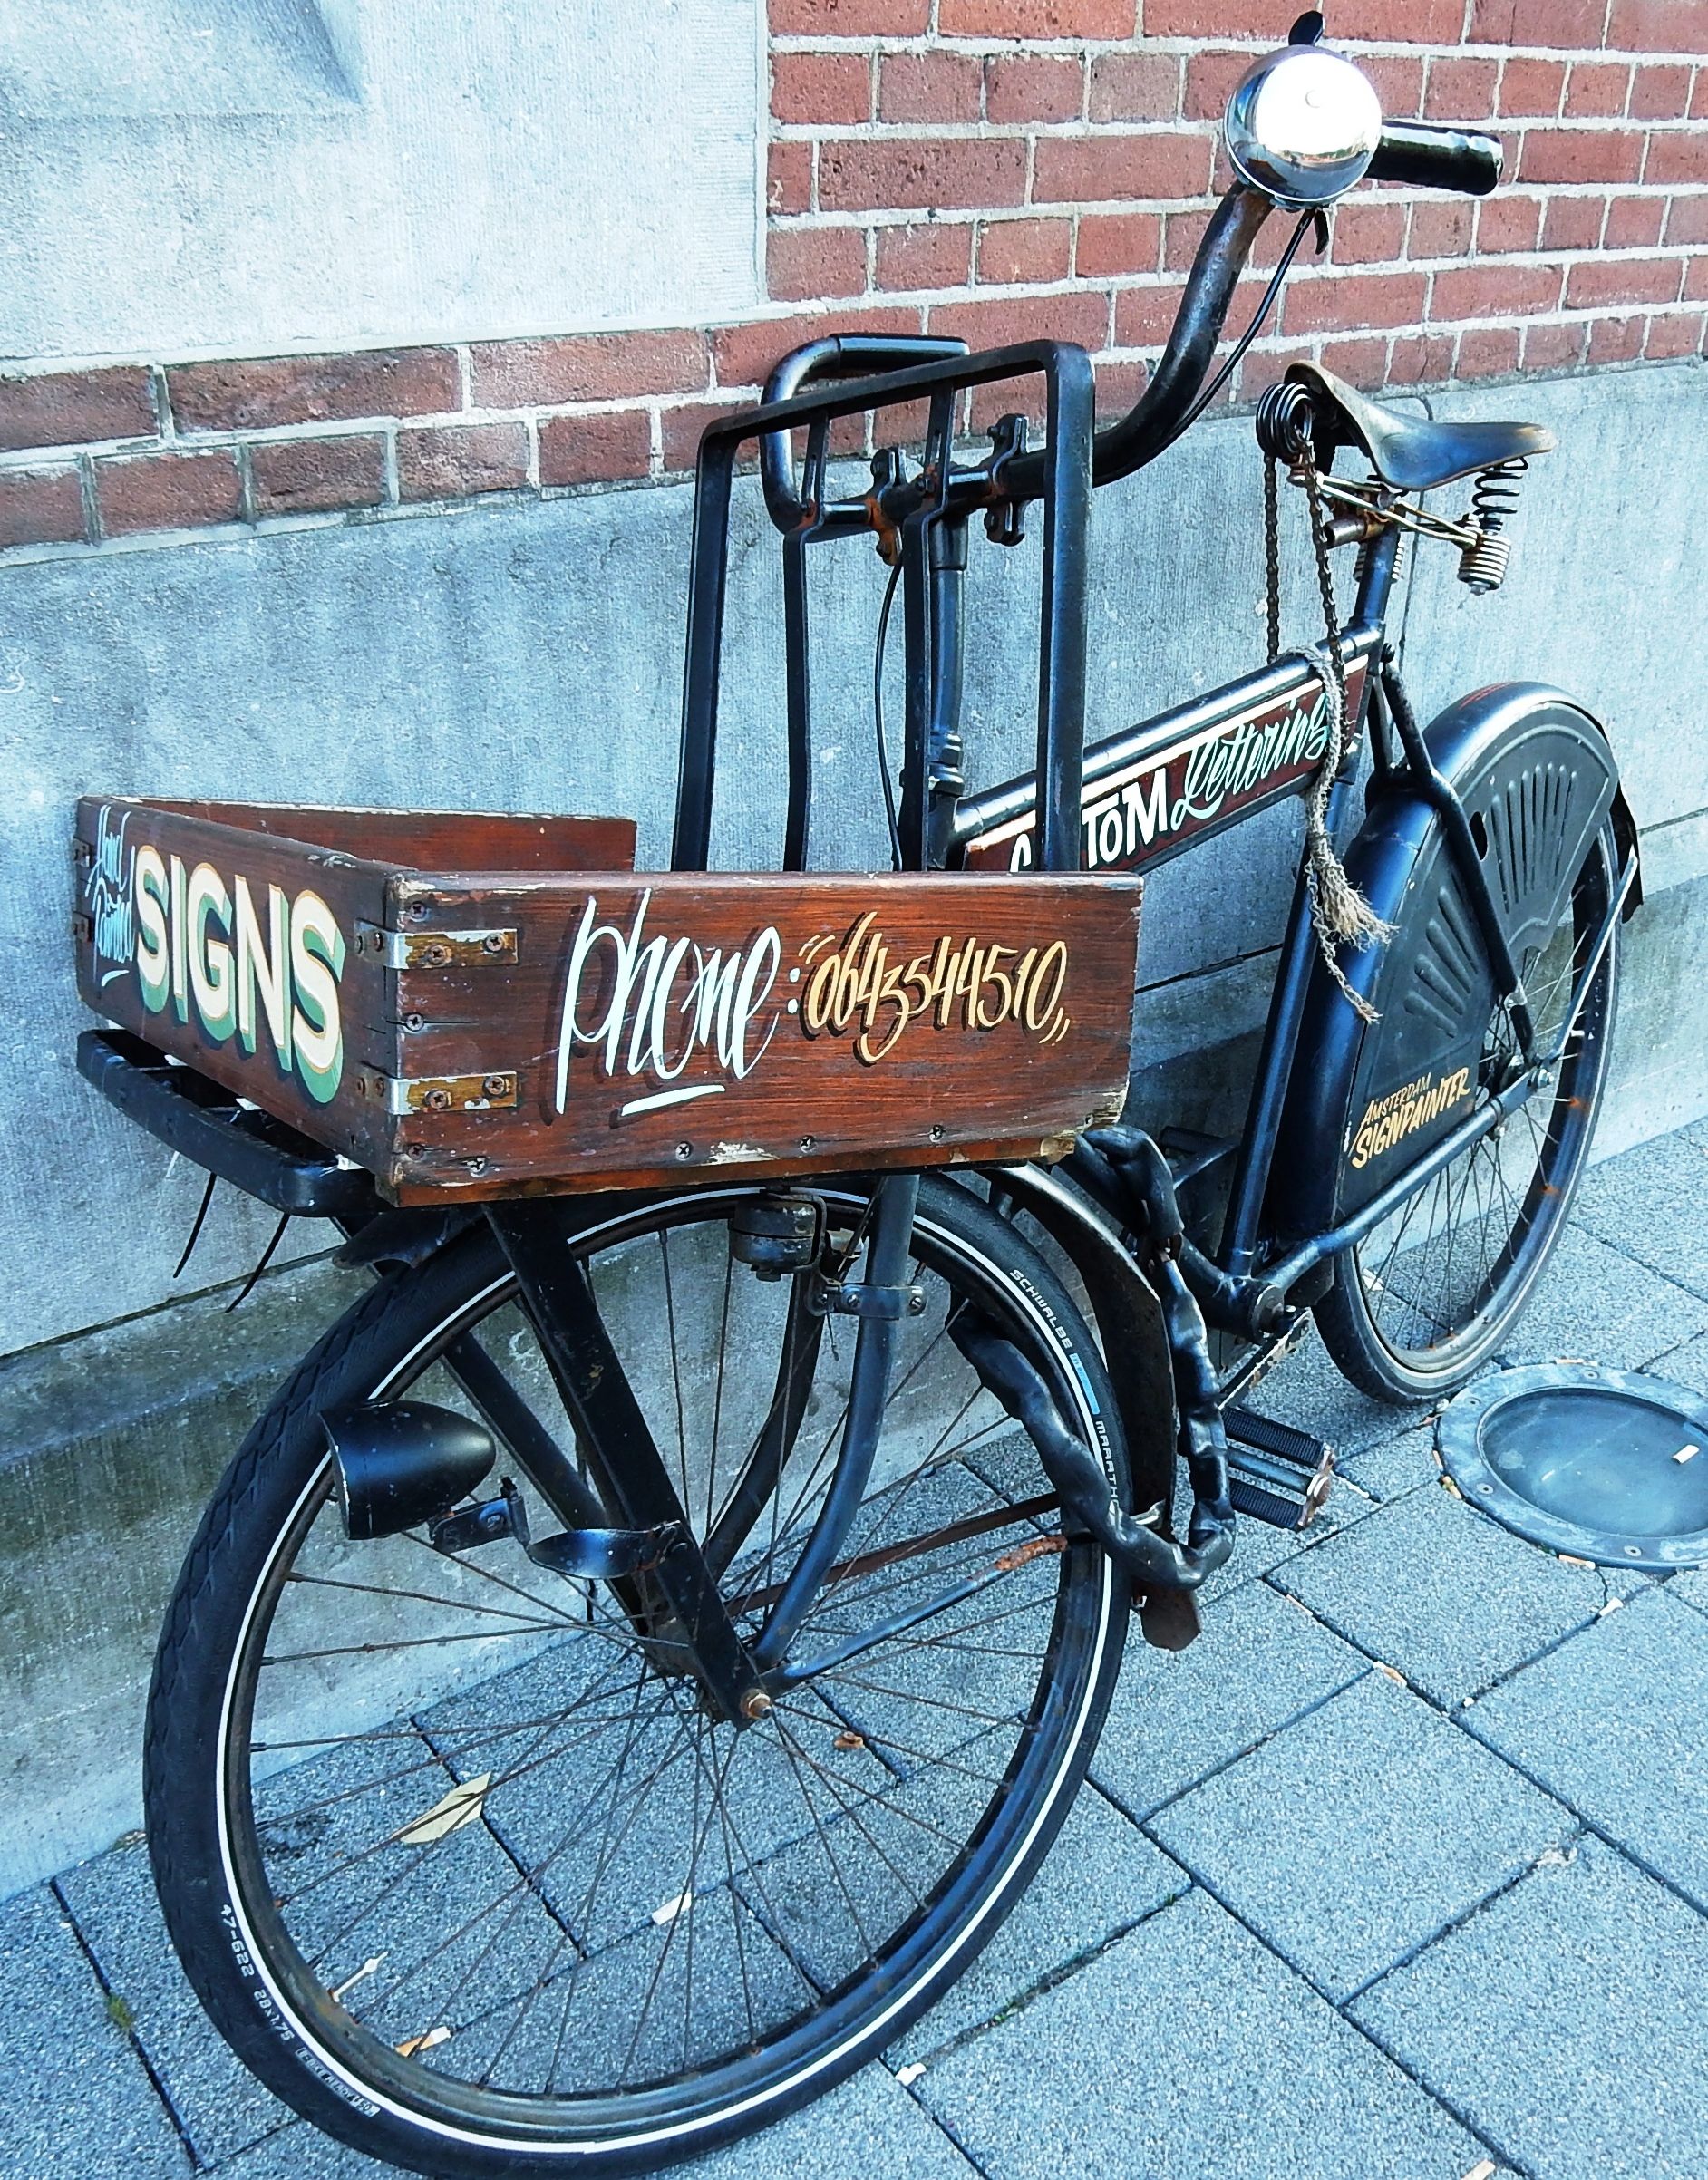 Bicycle with hand-painted lettering advertising sign painters